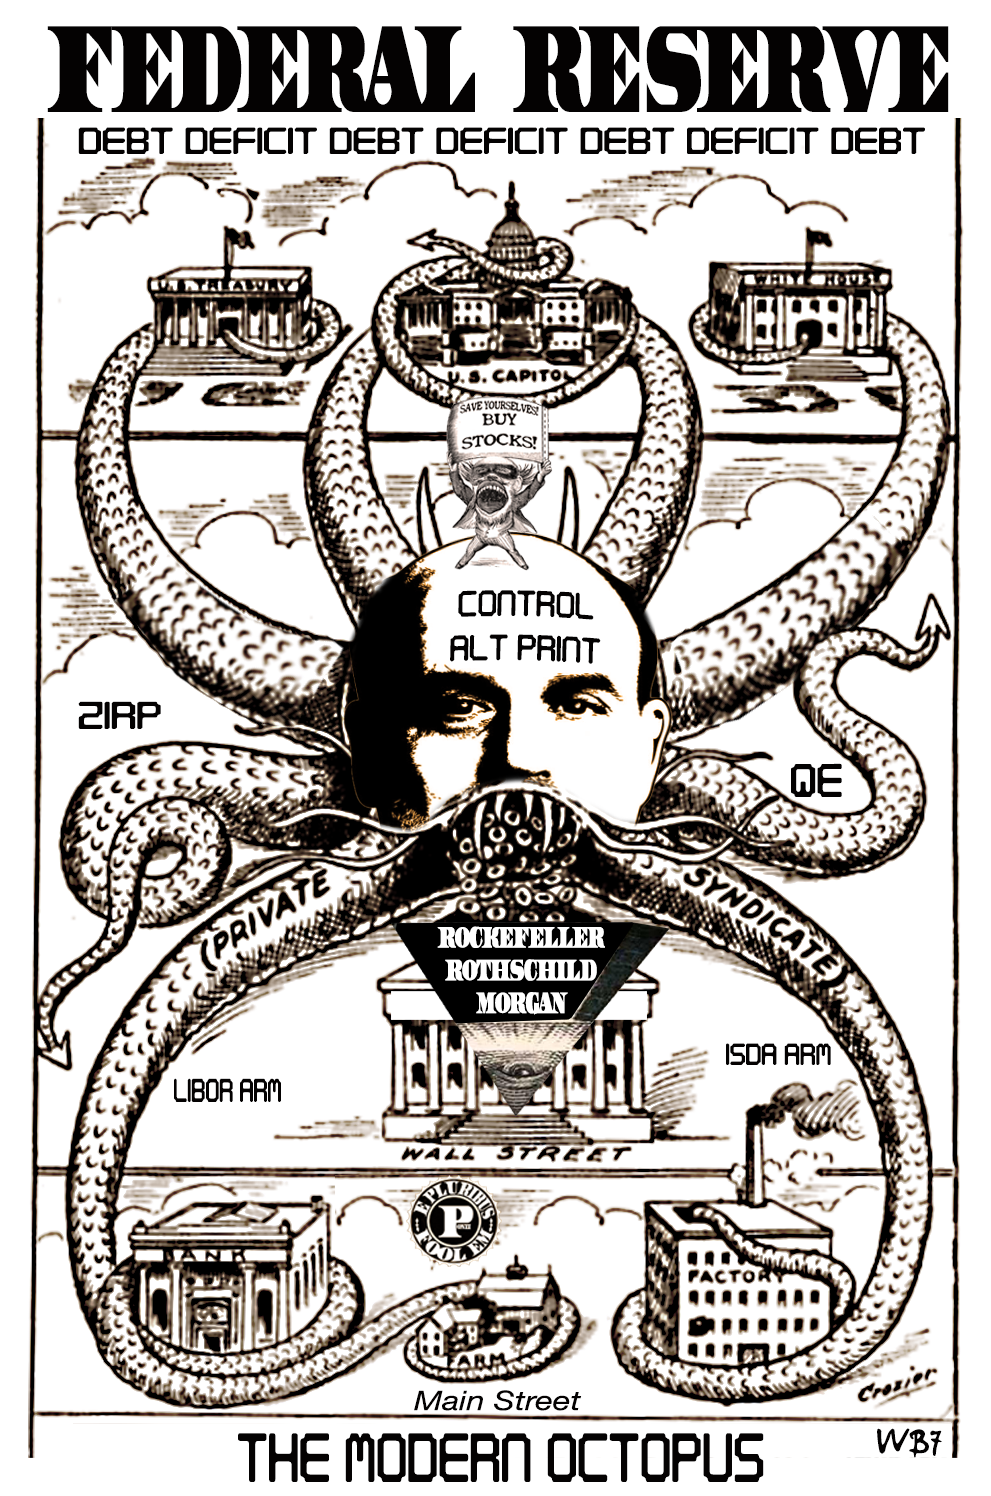 THE MODERN FEDERAL RESERVE OCTOPUS